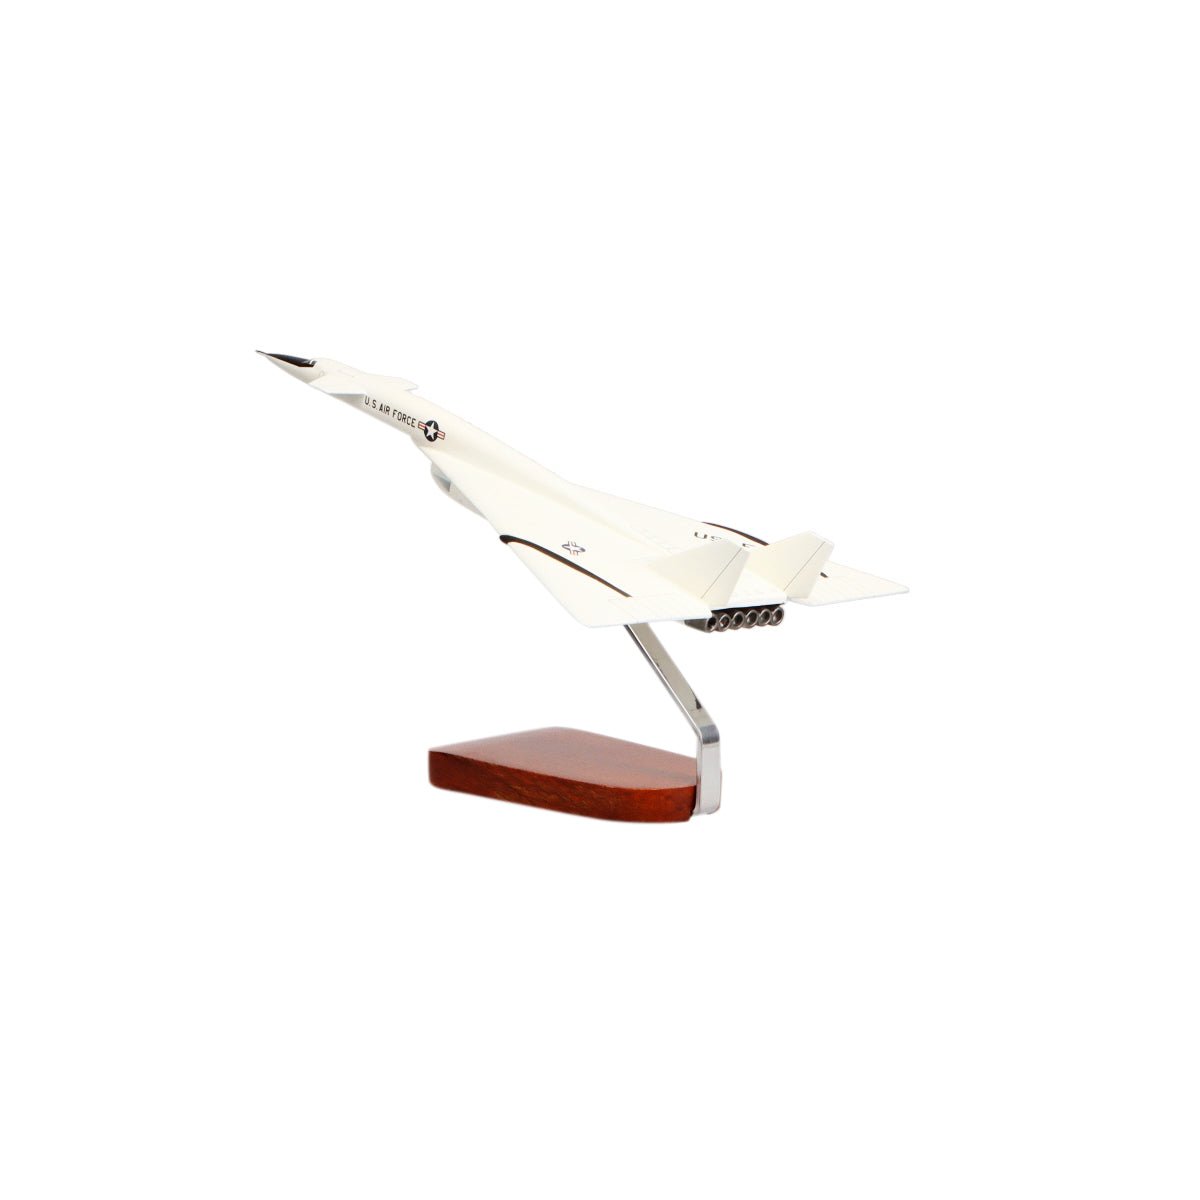 North American XB-70 Valkyrie Limited Edition Large Mahogany Model - PilotMall.com